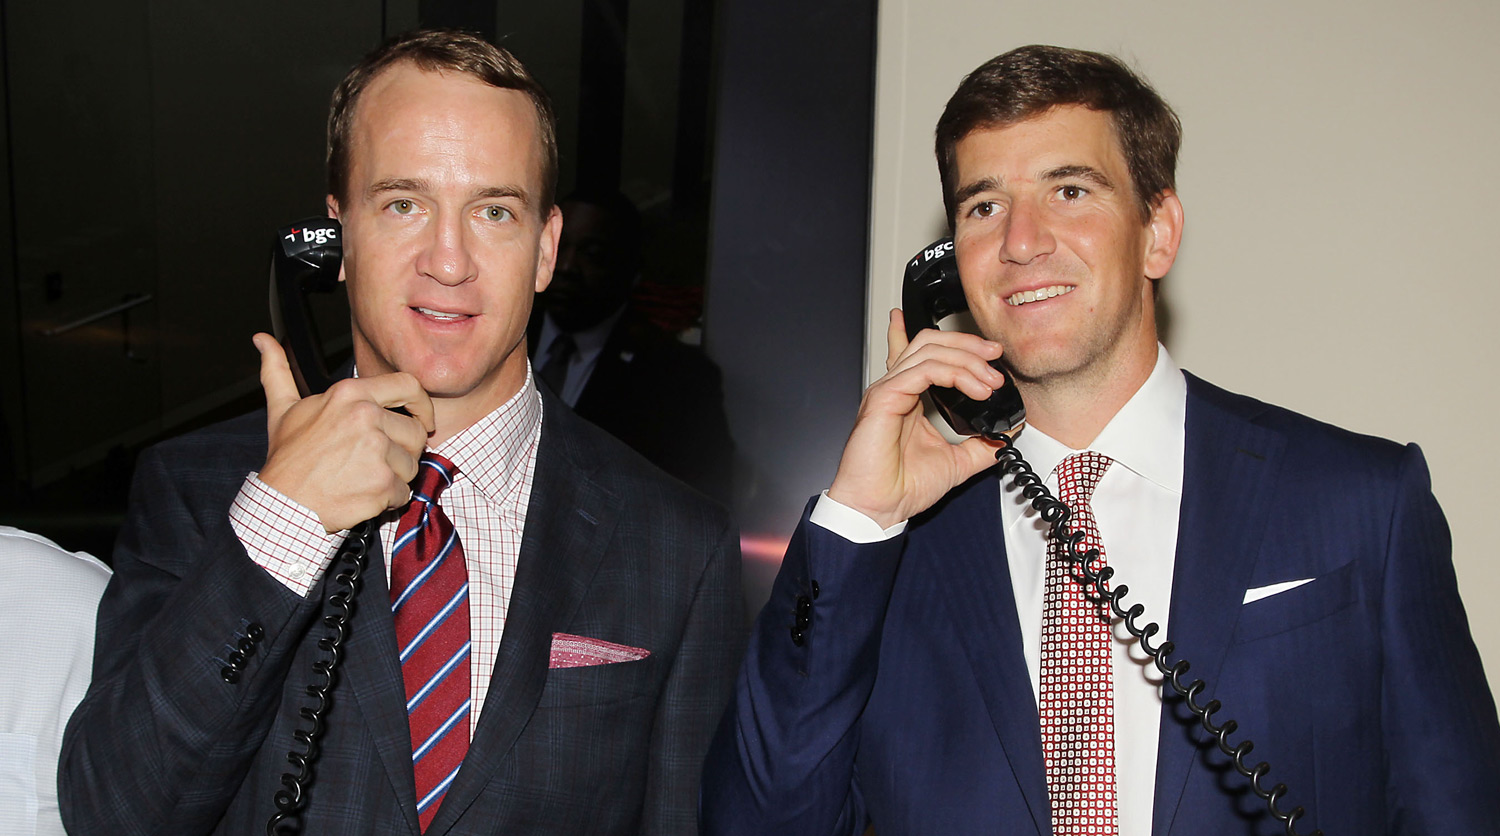 Eli & Peyton Manning Join Other Celebs at 9/11 Charity Day